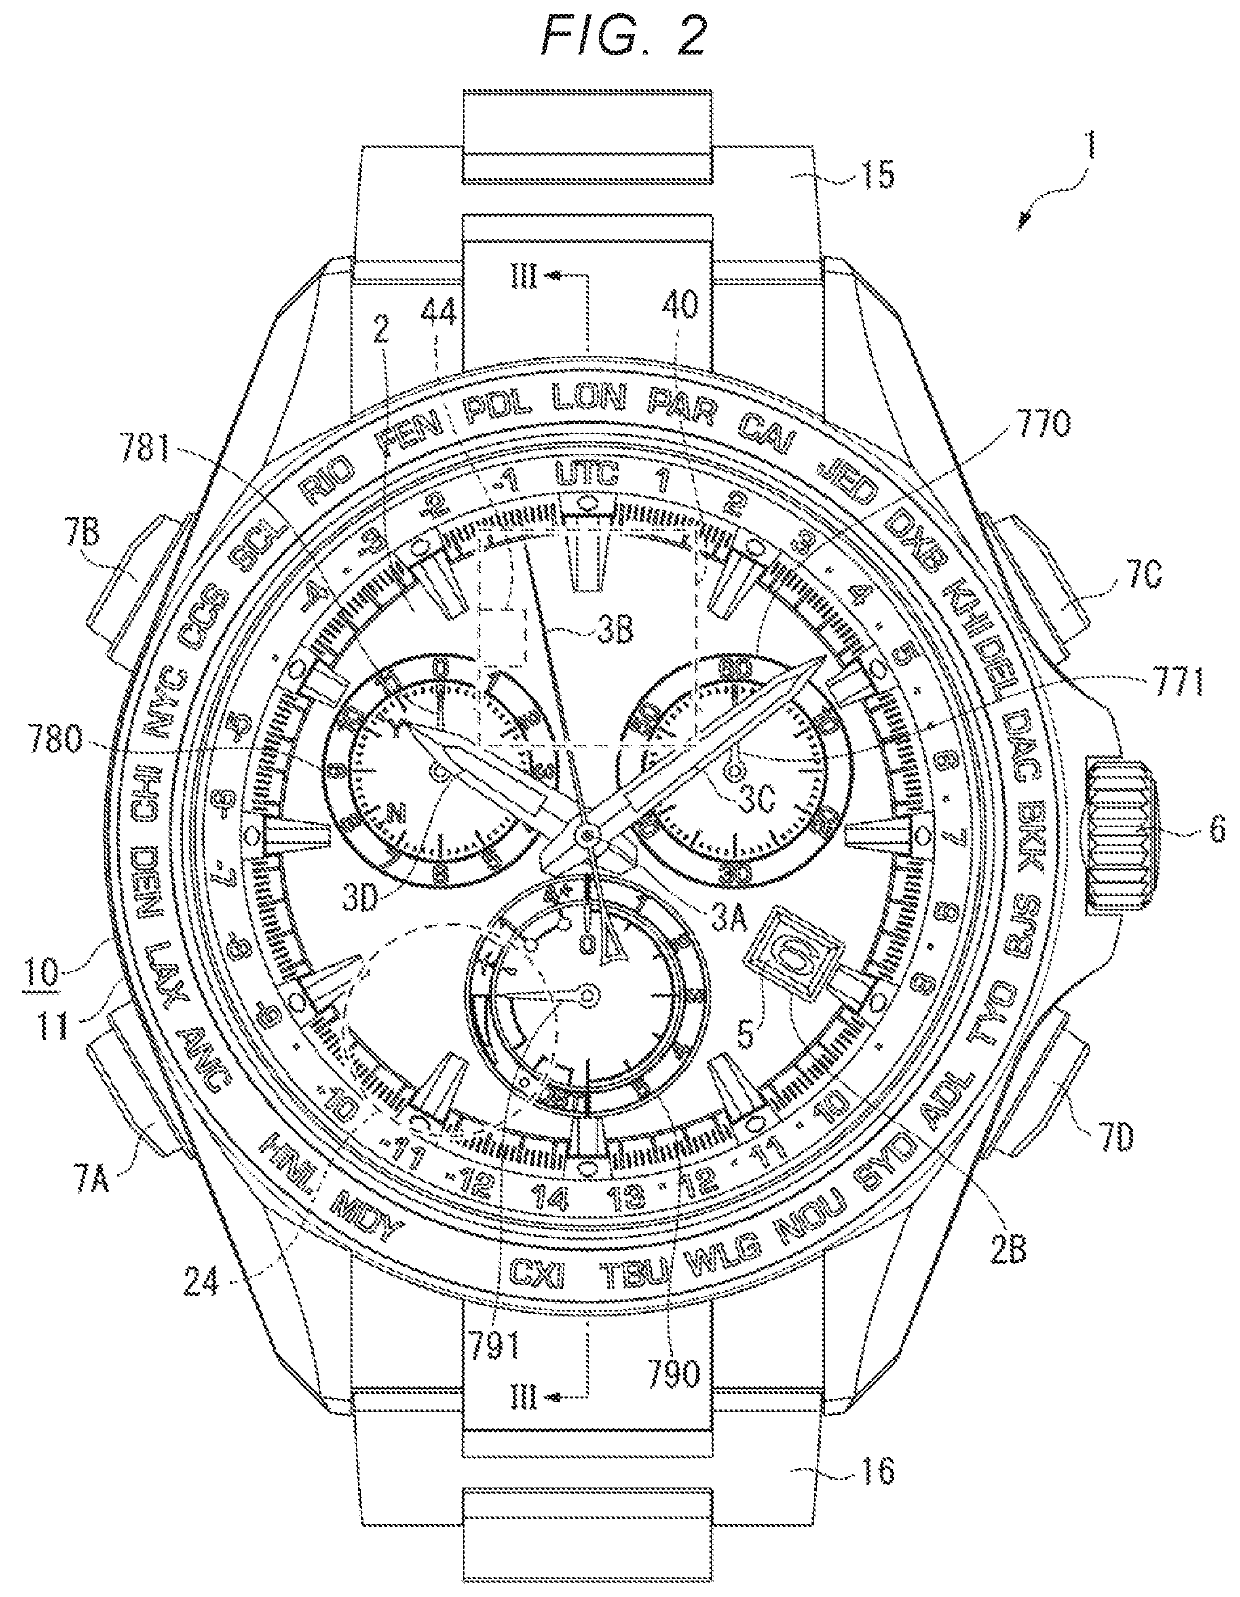 Electronic timepiece having a conductive member spaced apart from a planar antenna